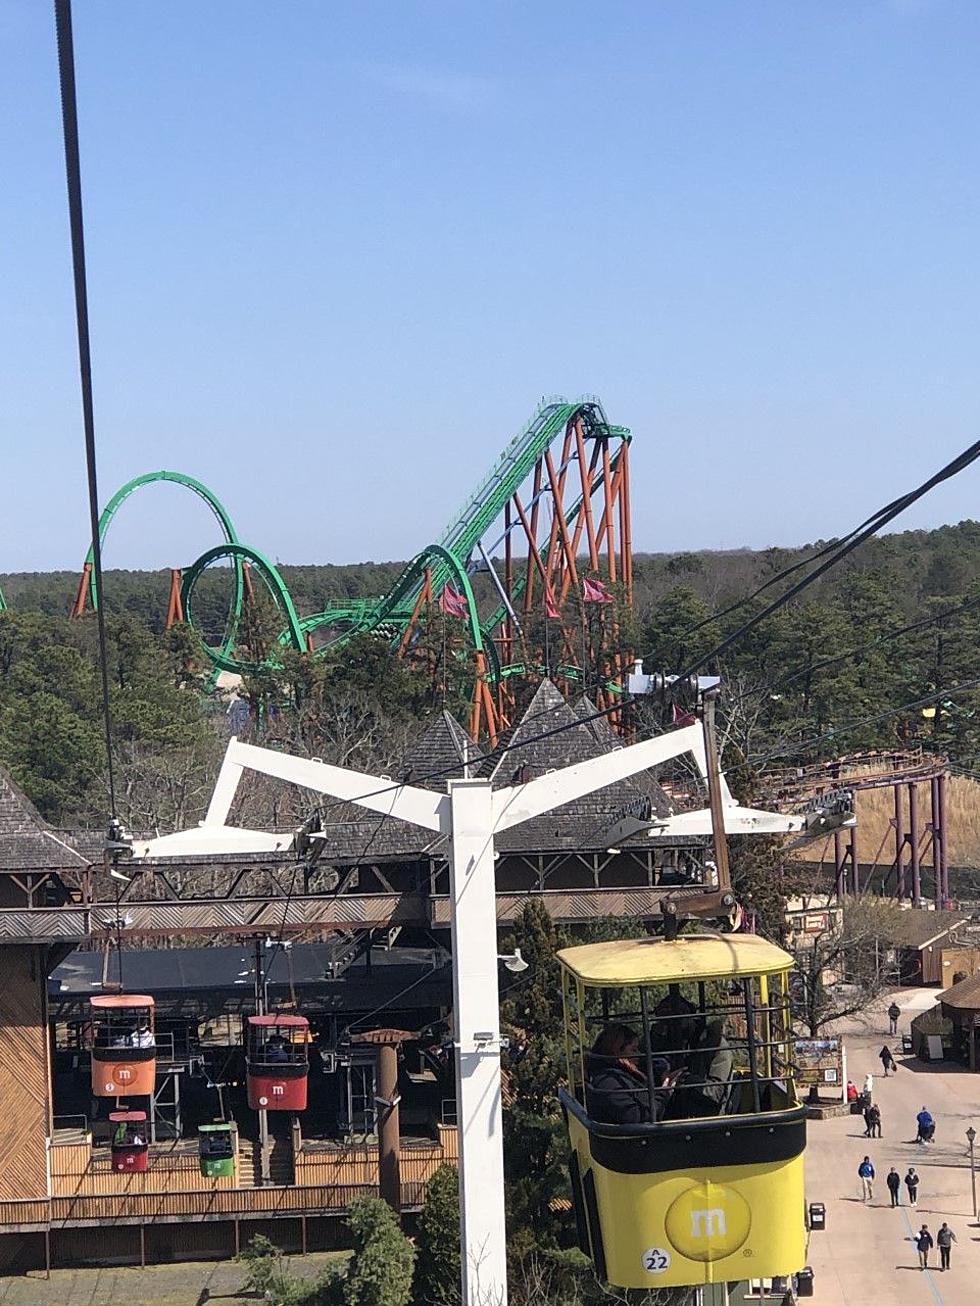 Some New Changes at Six Flags Great Adventure Jackson, NJ